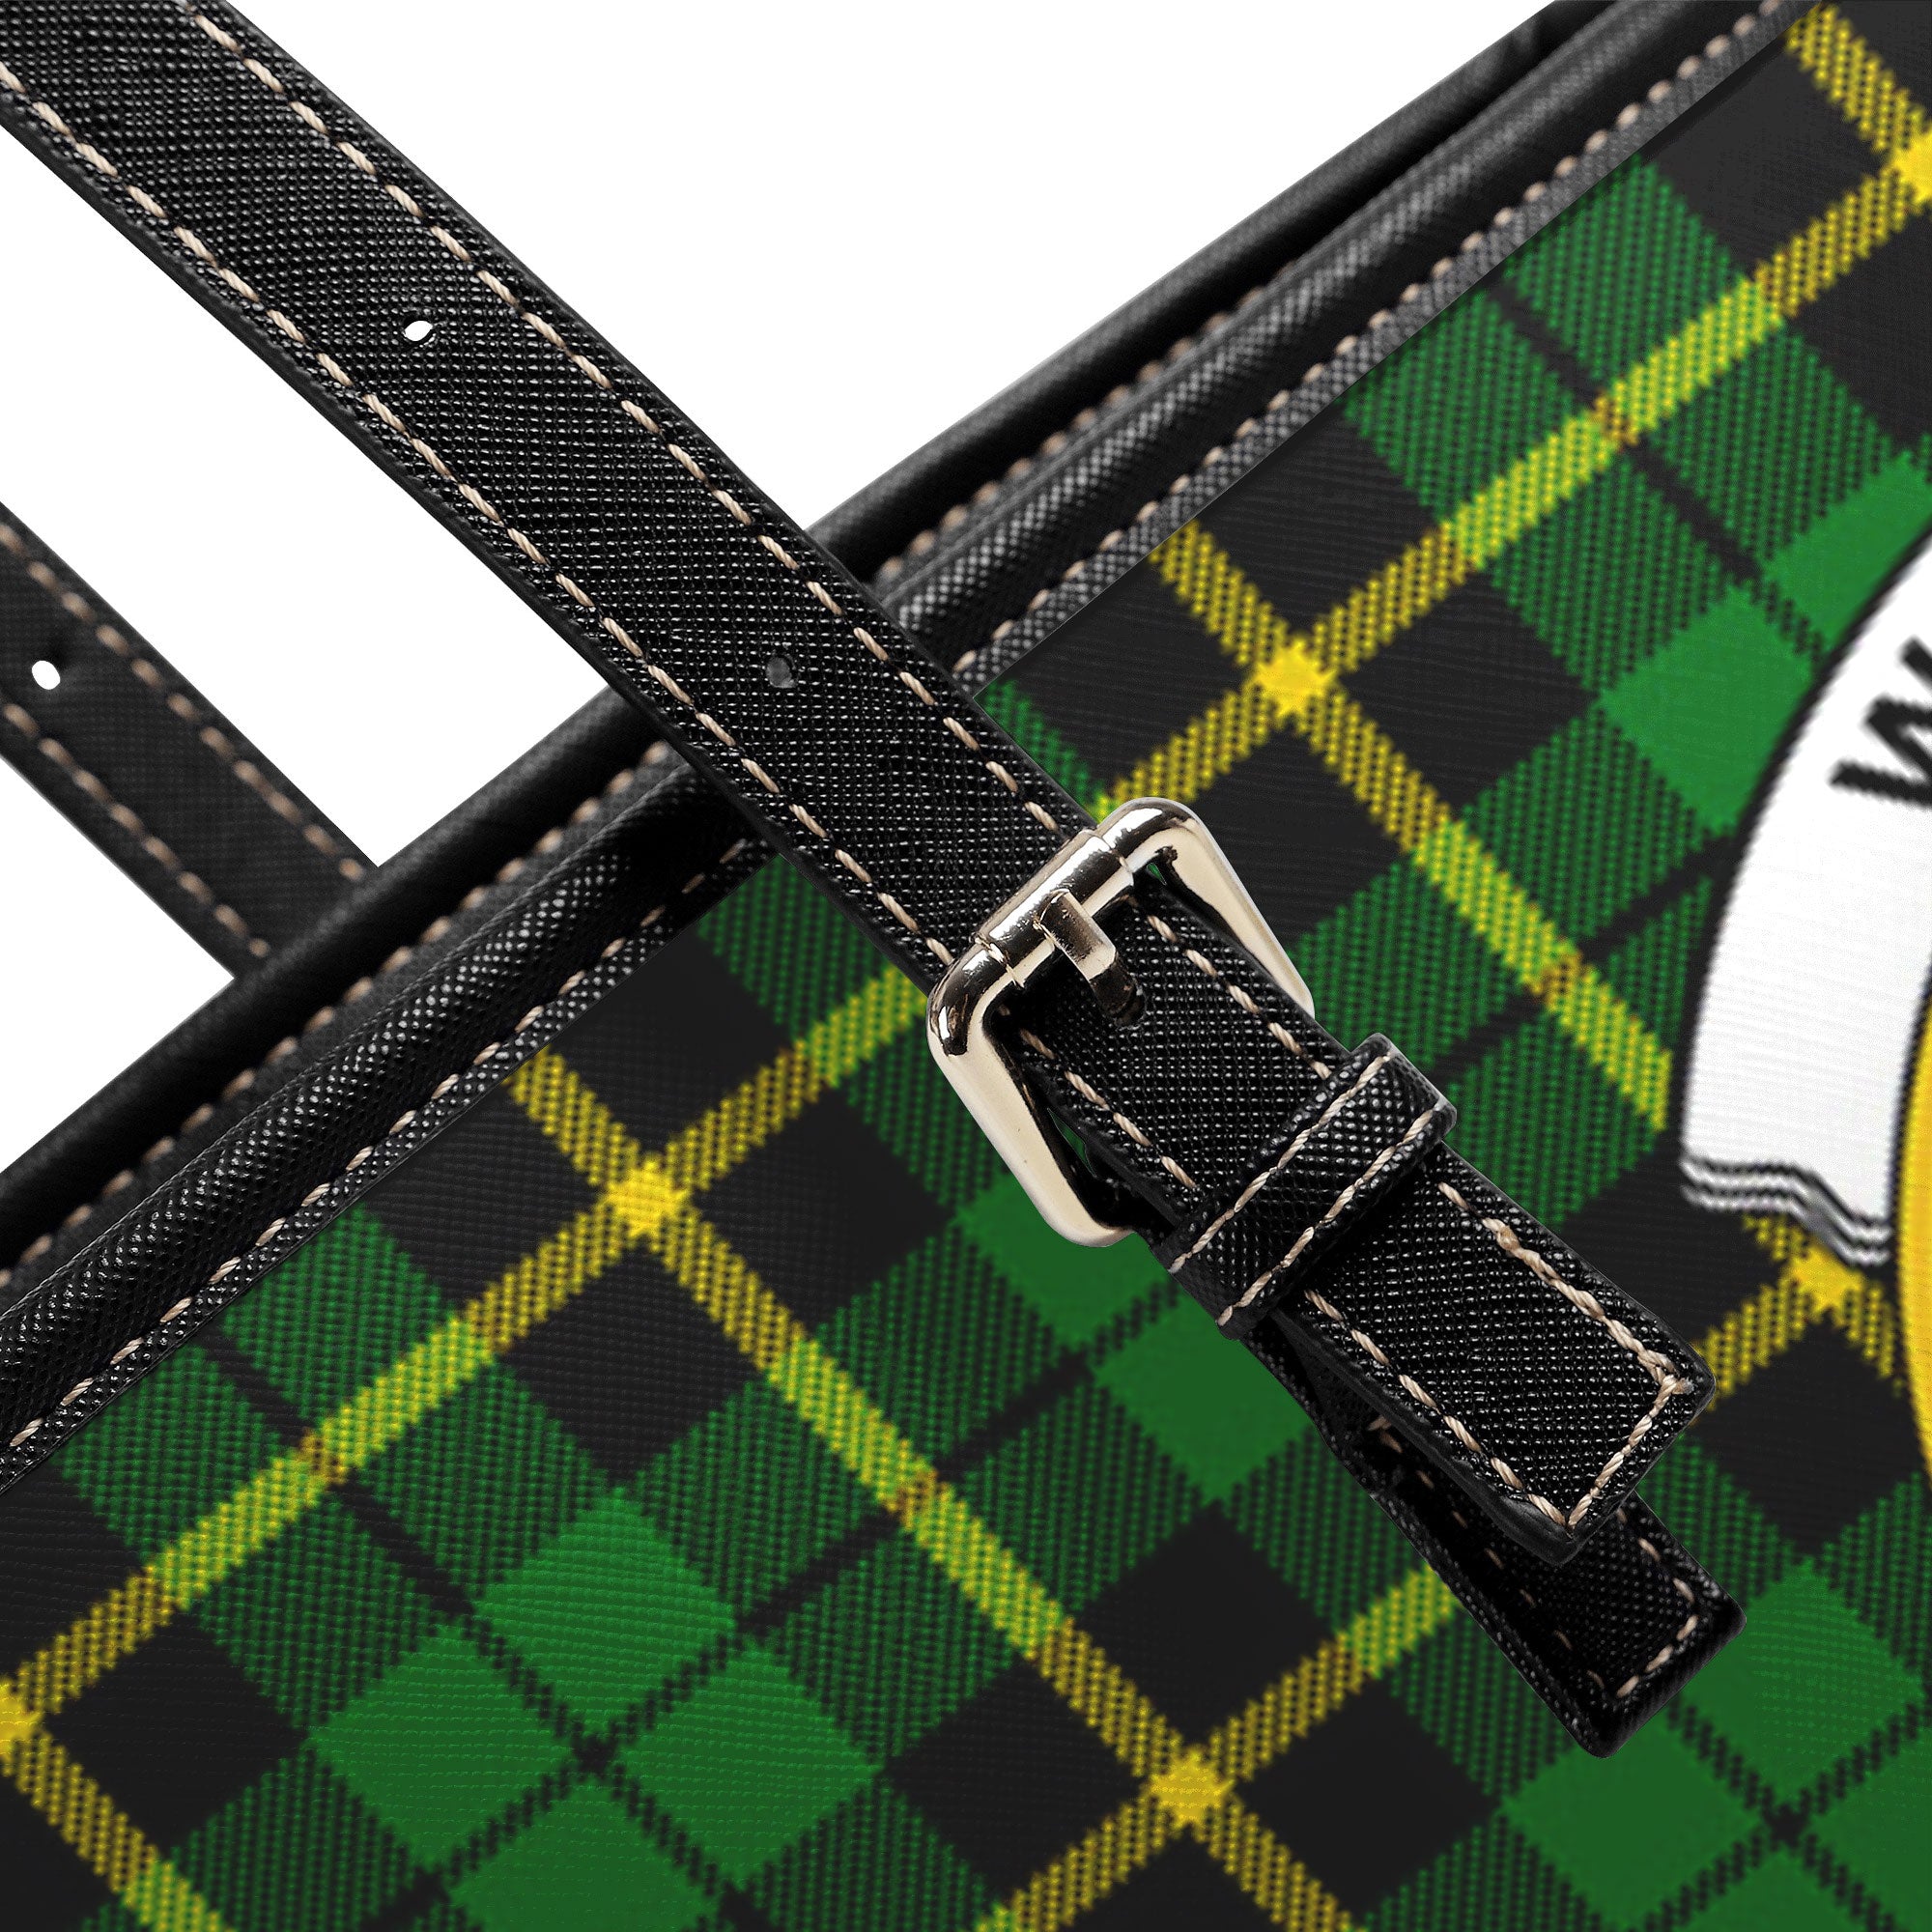 Wallace Hunting Modern Tartan Crest Leather Tote Bag